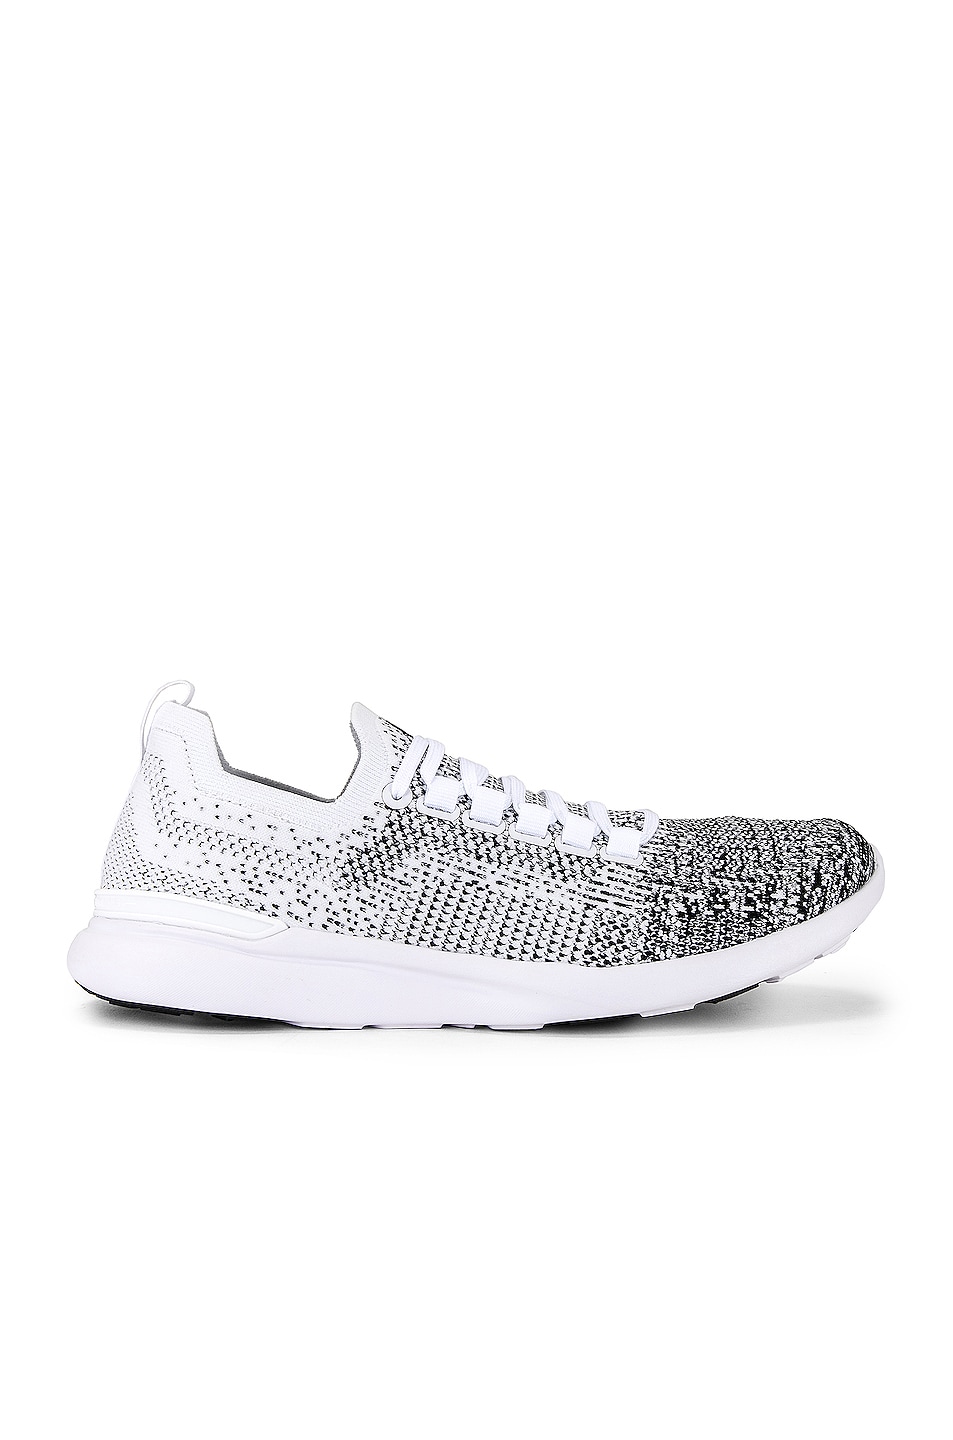 Image 1 of APL: Athletic Propulsion Labs Techloom Breeze in White & Black Ombre